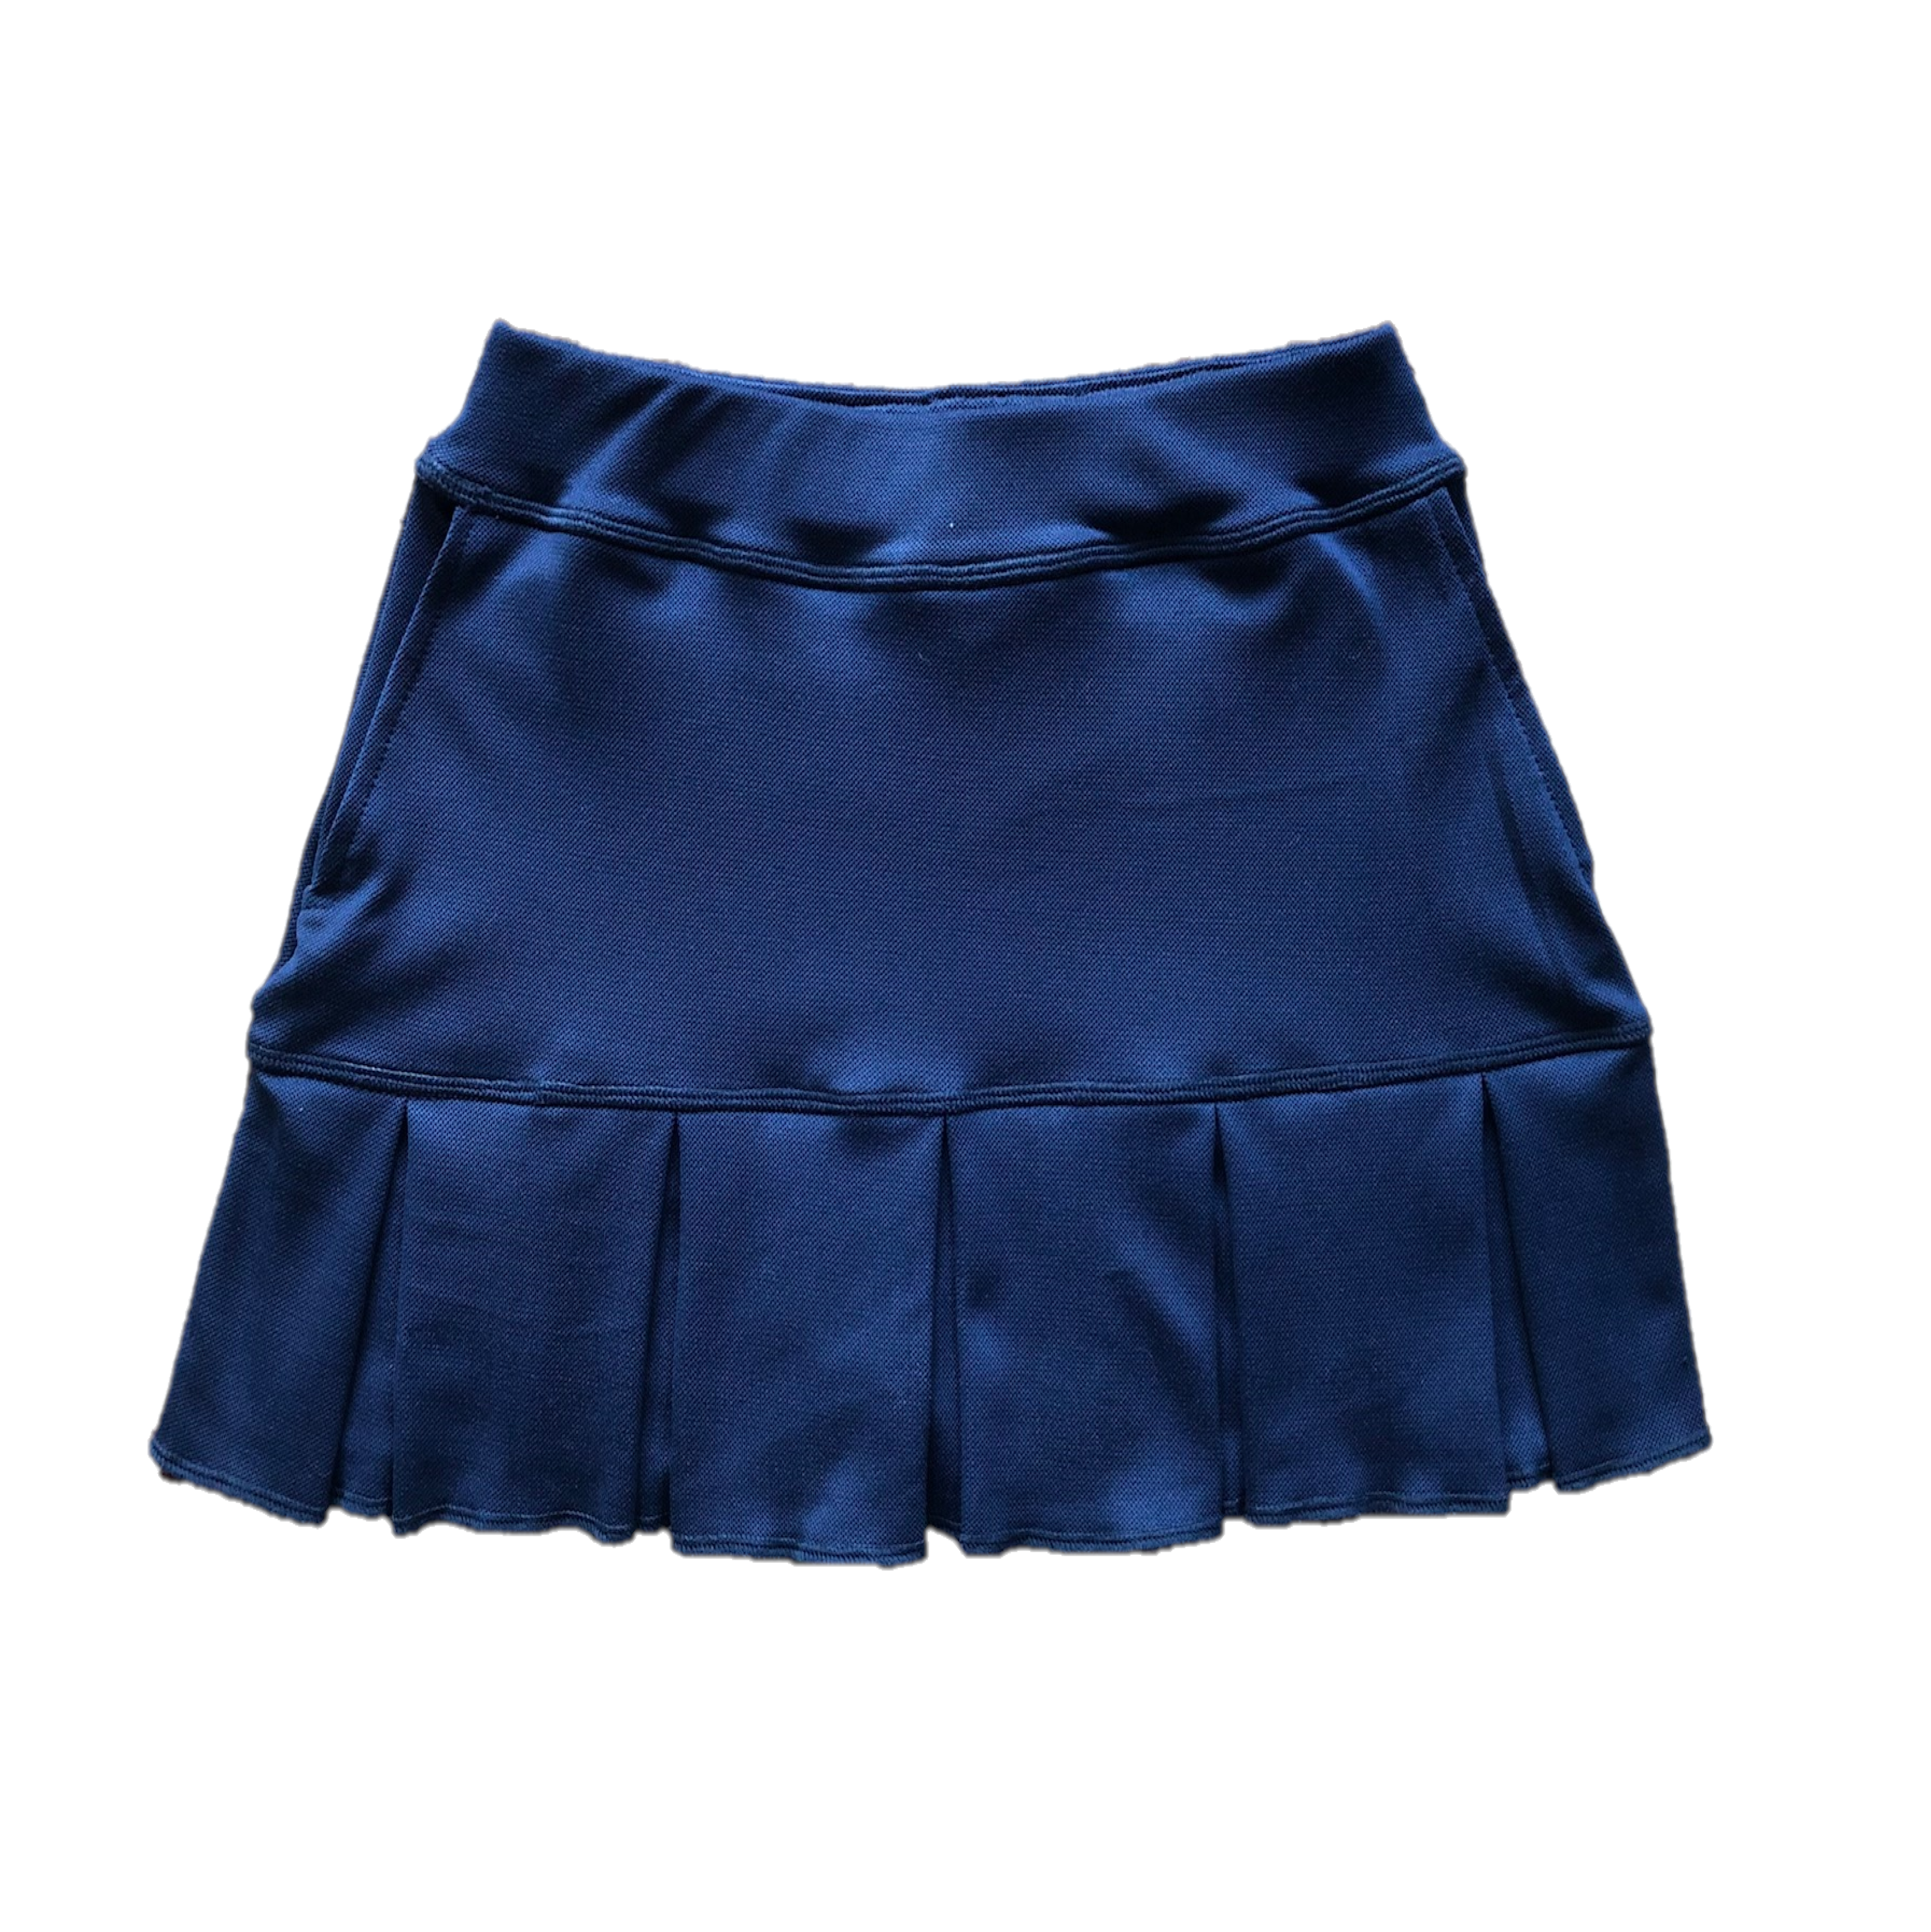 LS-064D || Skirt Navy Blue with White Trim 2 Rear Pockets and Pleated Hem